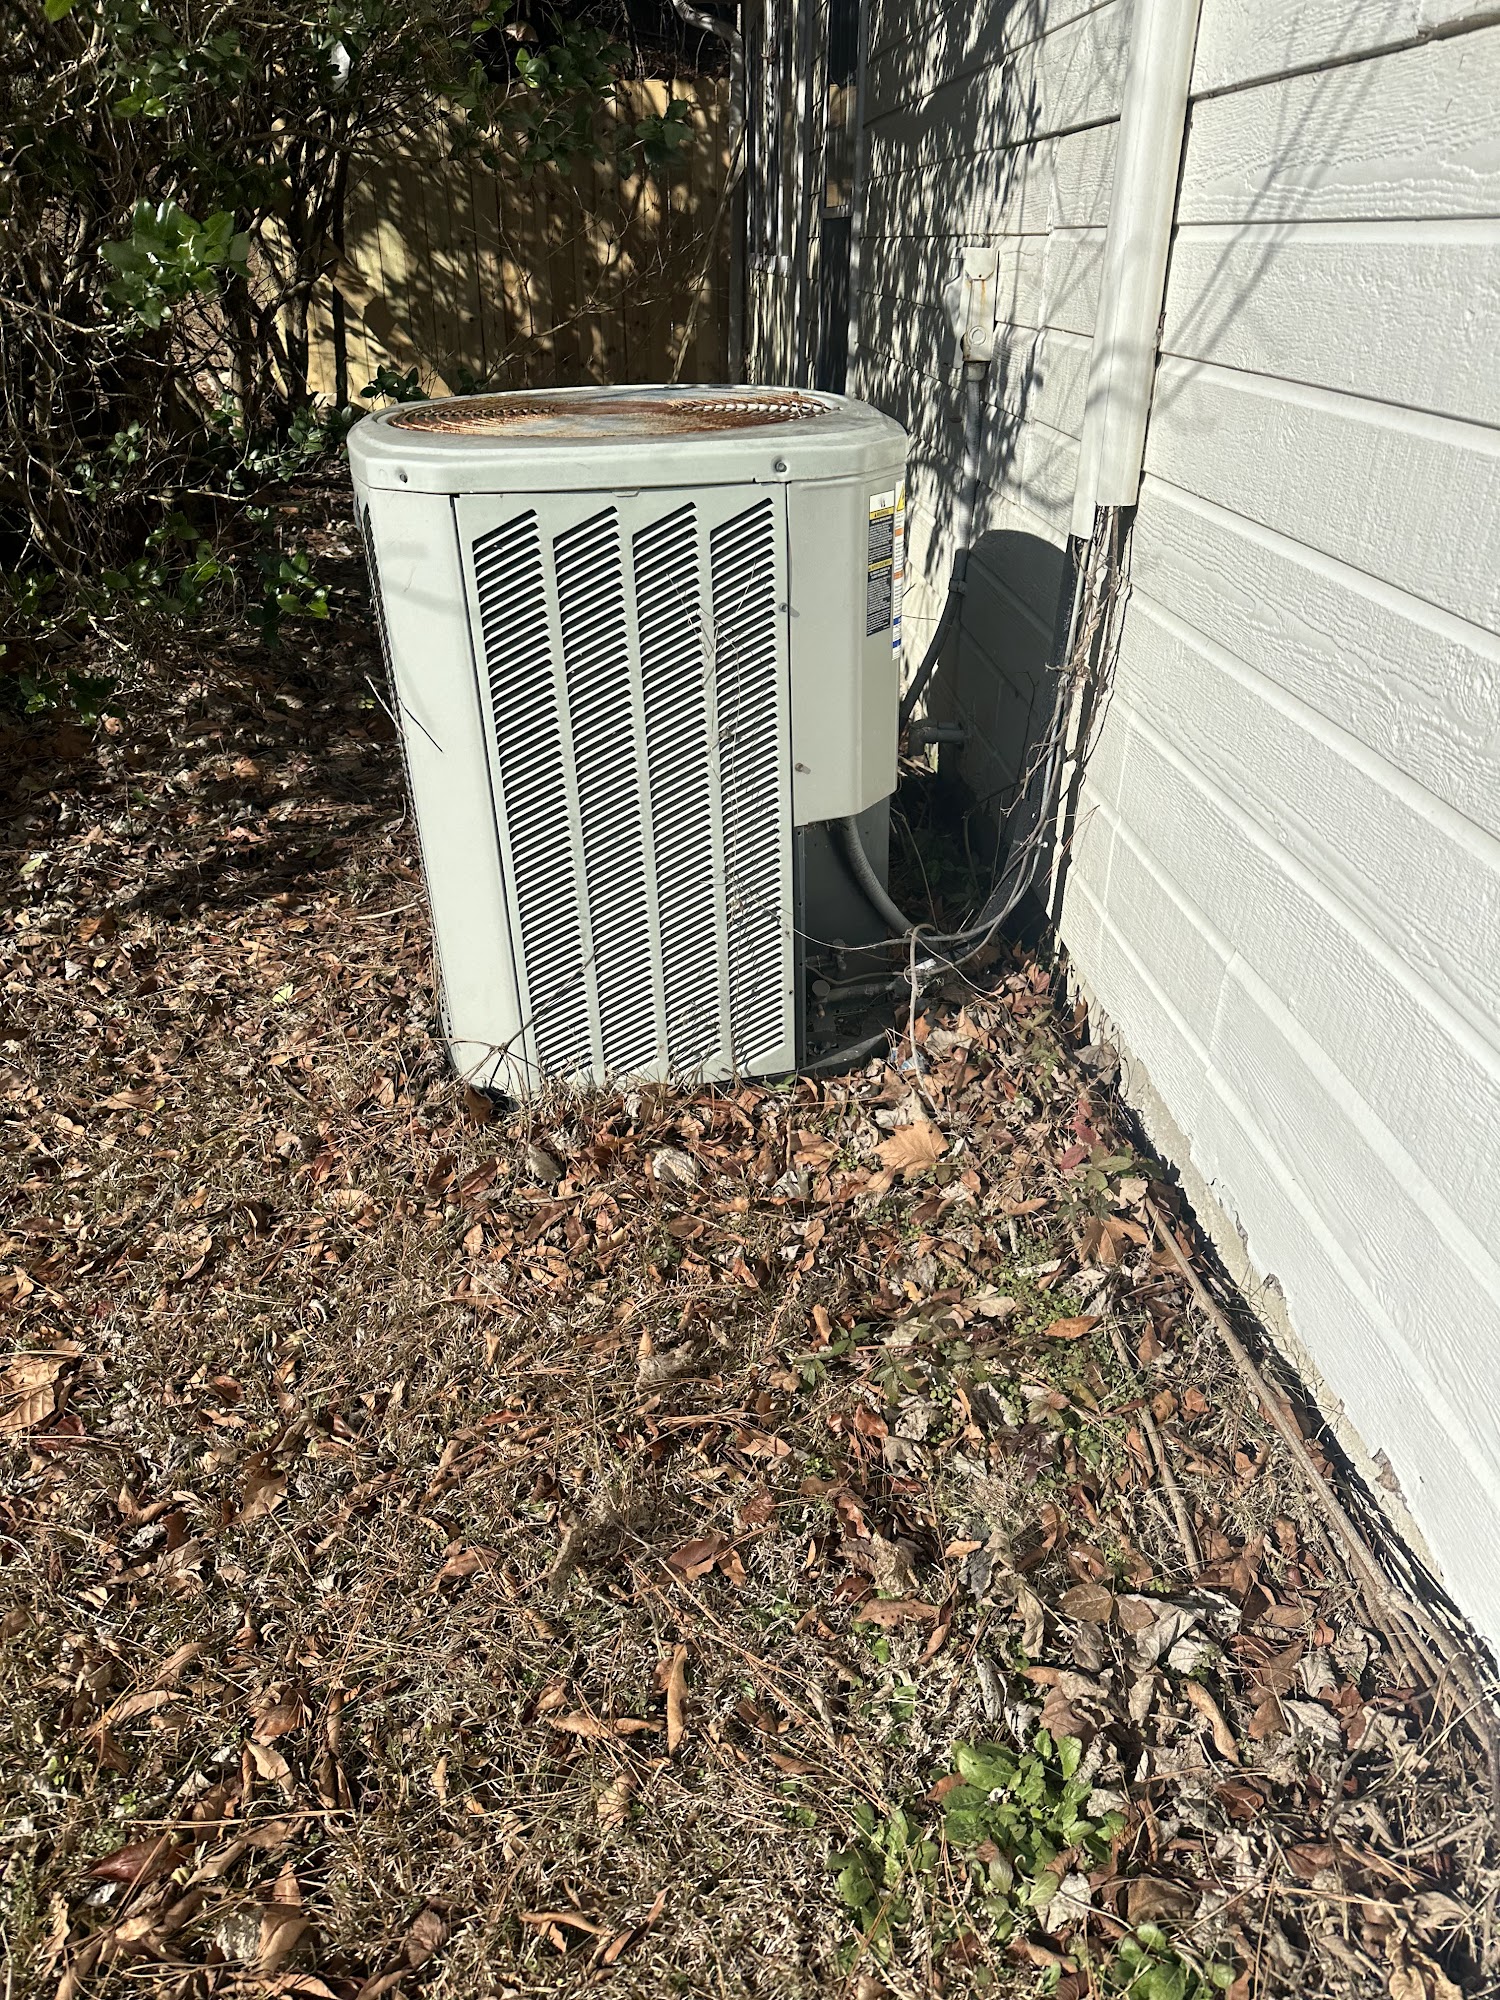 McNeal Heating and Air Conditioning 8695 Co Rd 10, Montevallo Alabama 35115